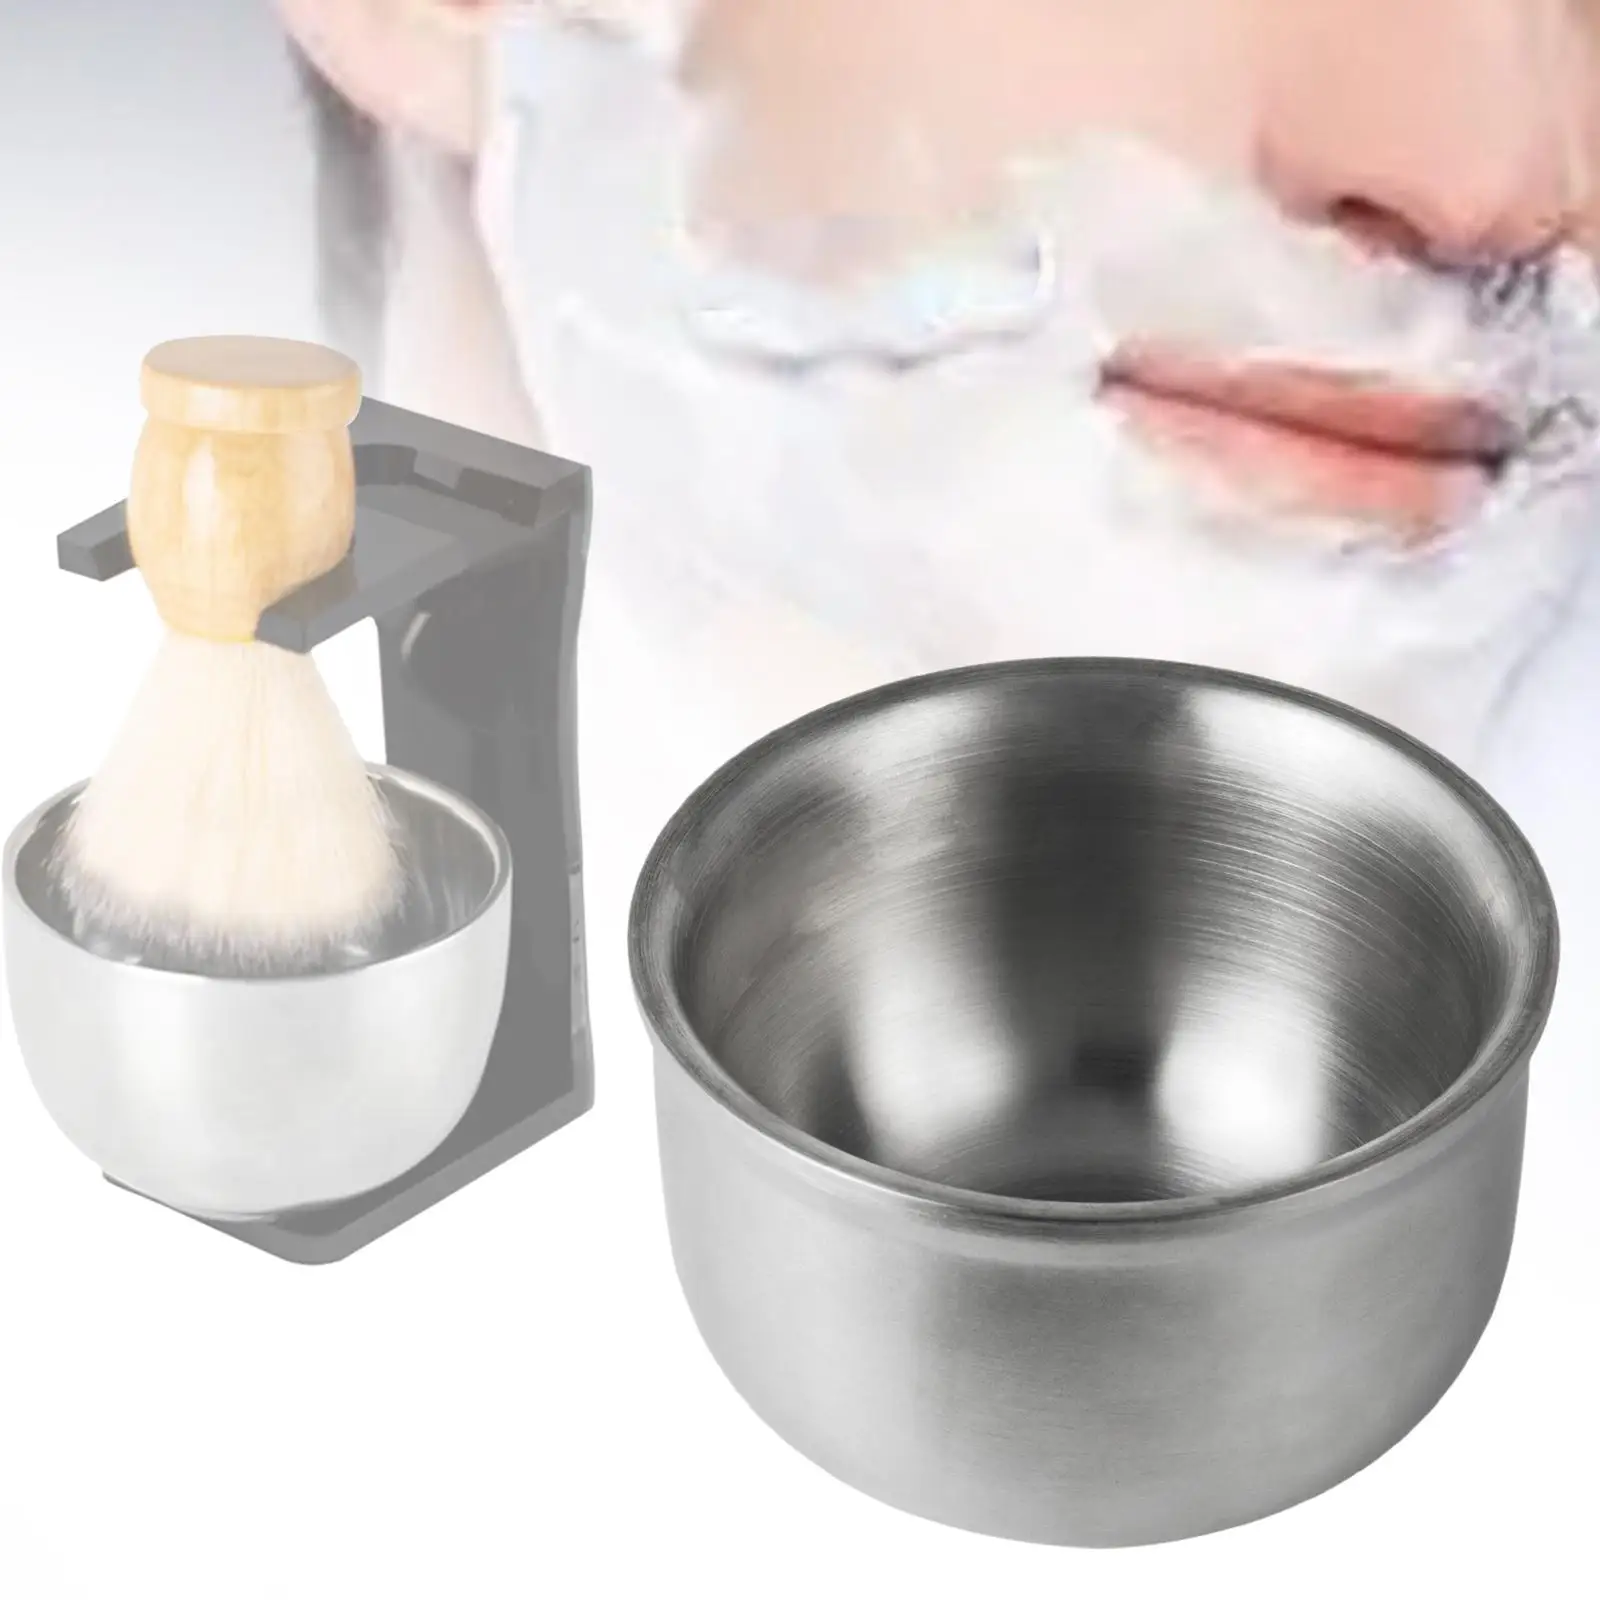 Shaving Soap Bowl Durable Portable Fits Wet Shave Small Unbreakable Smooth Stainless Steel Easy to Lather Shave Soap Cup for Men